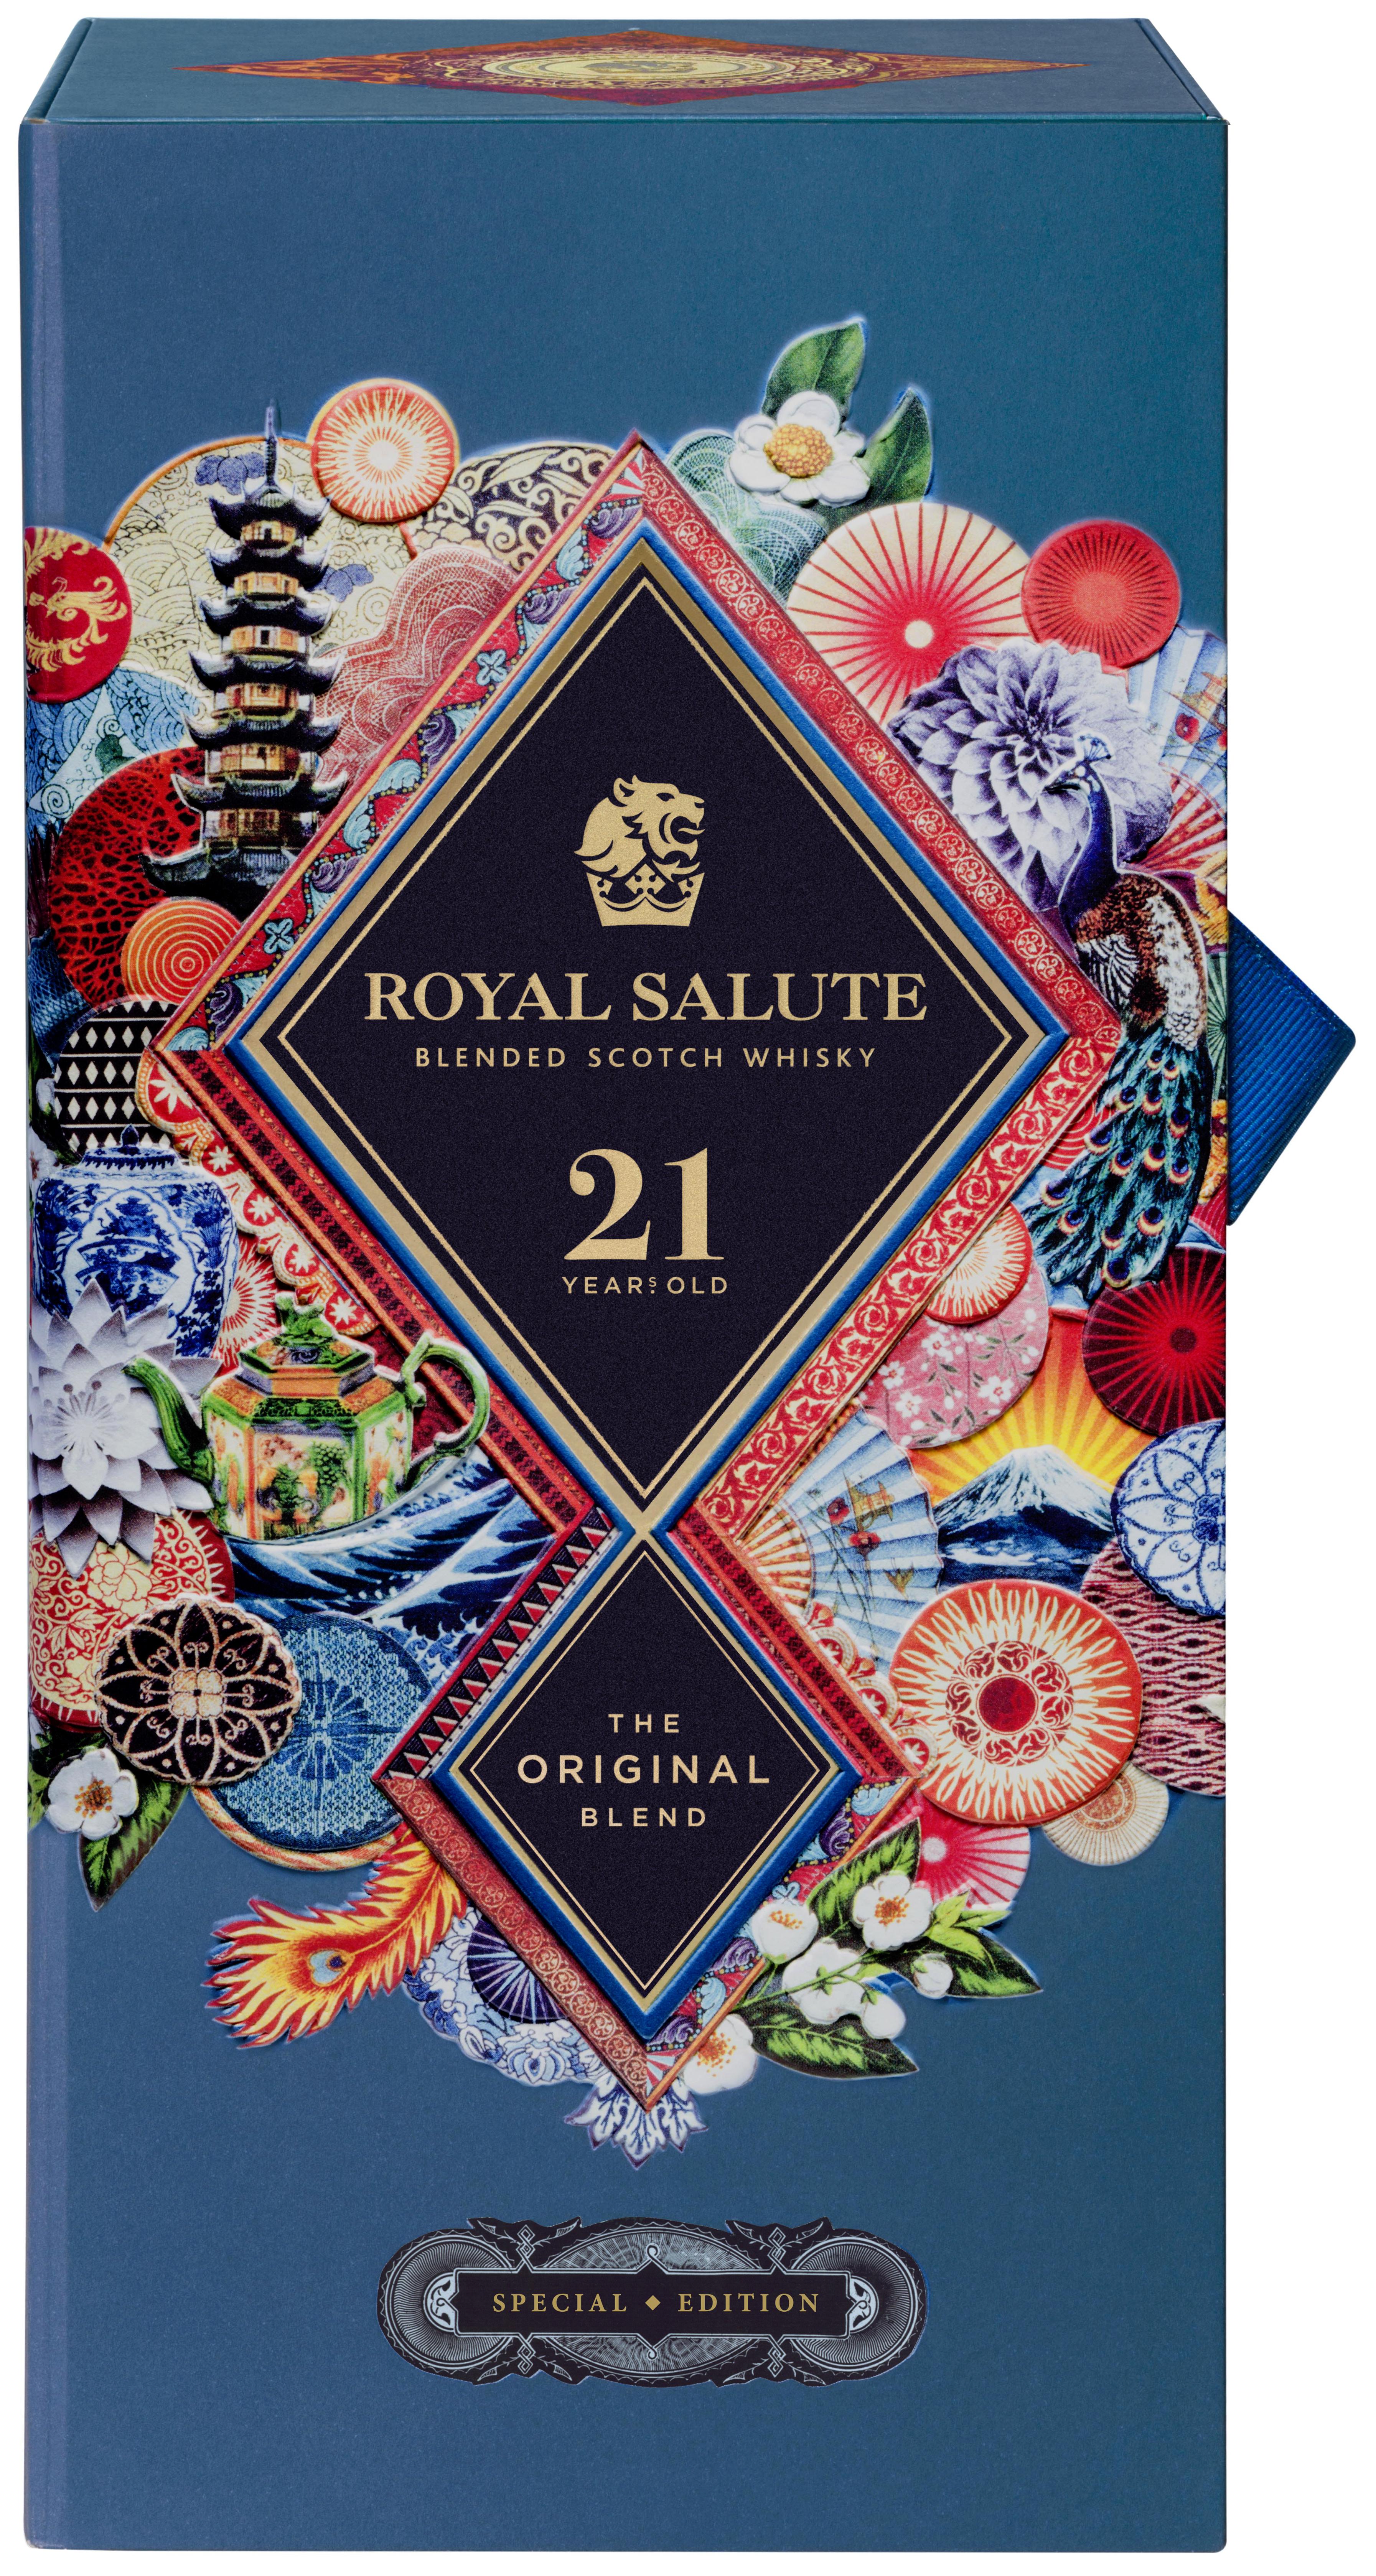 Royal Salute ‘Art of Blending’ limited edition gift pack